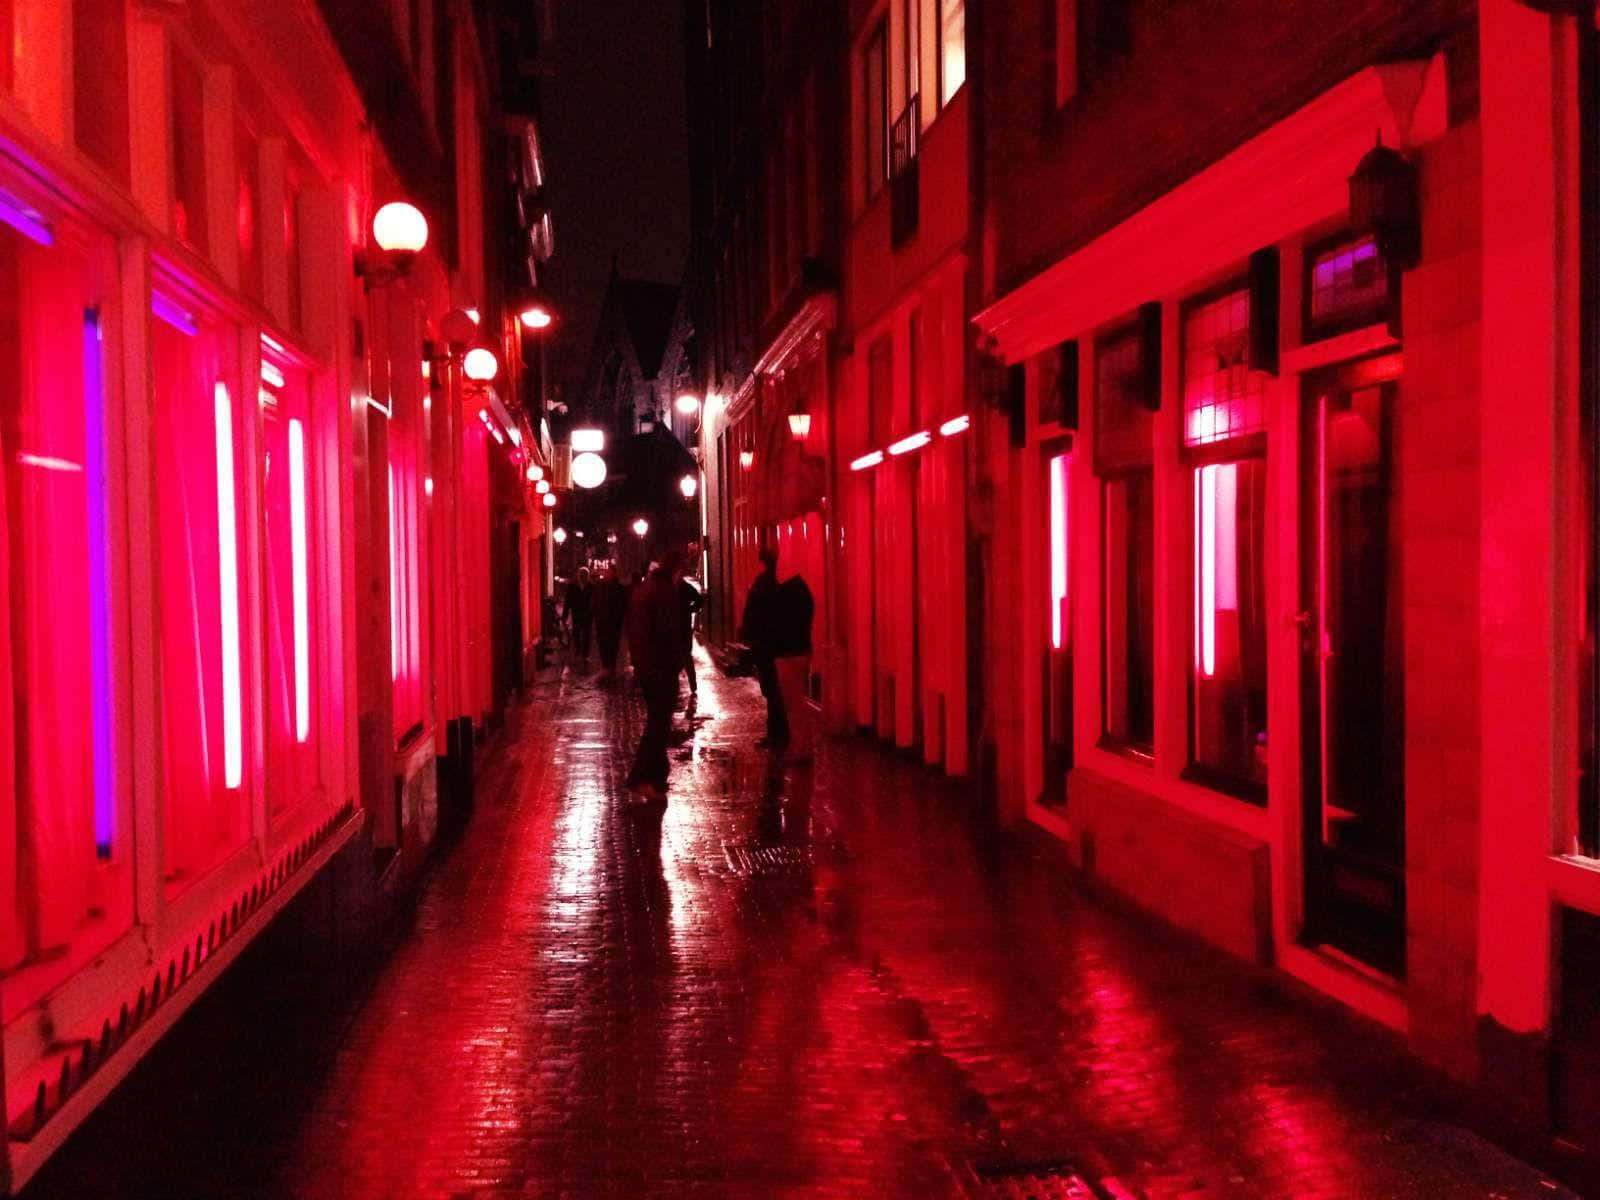 Vibrant neon lights in the Red Light District Wallpaper